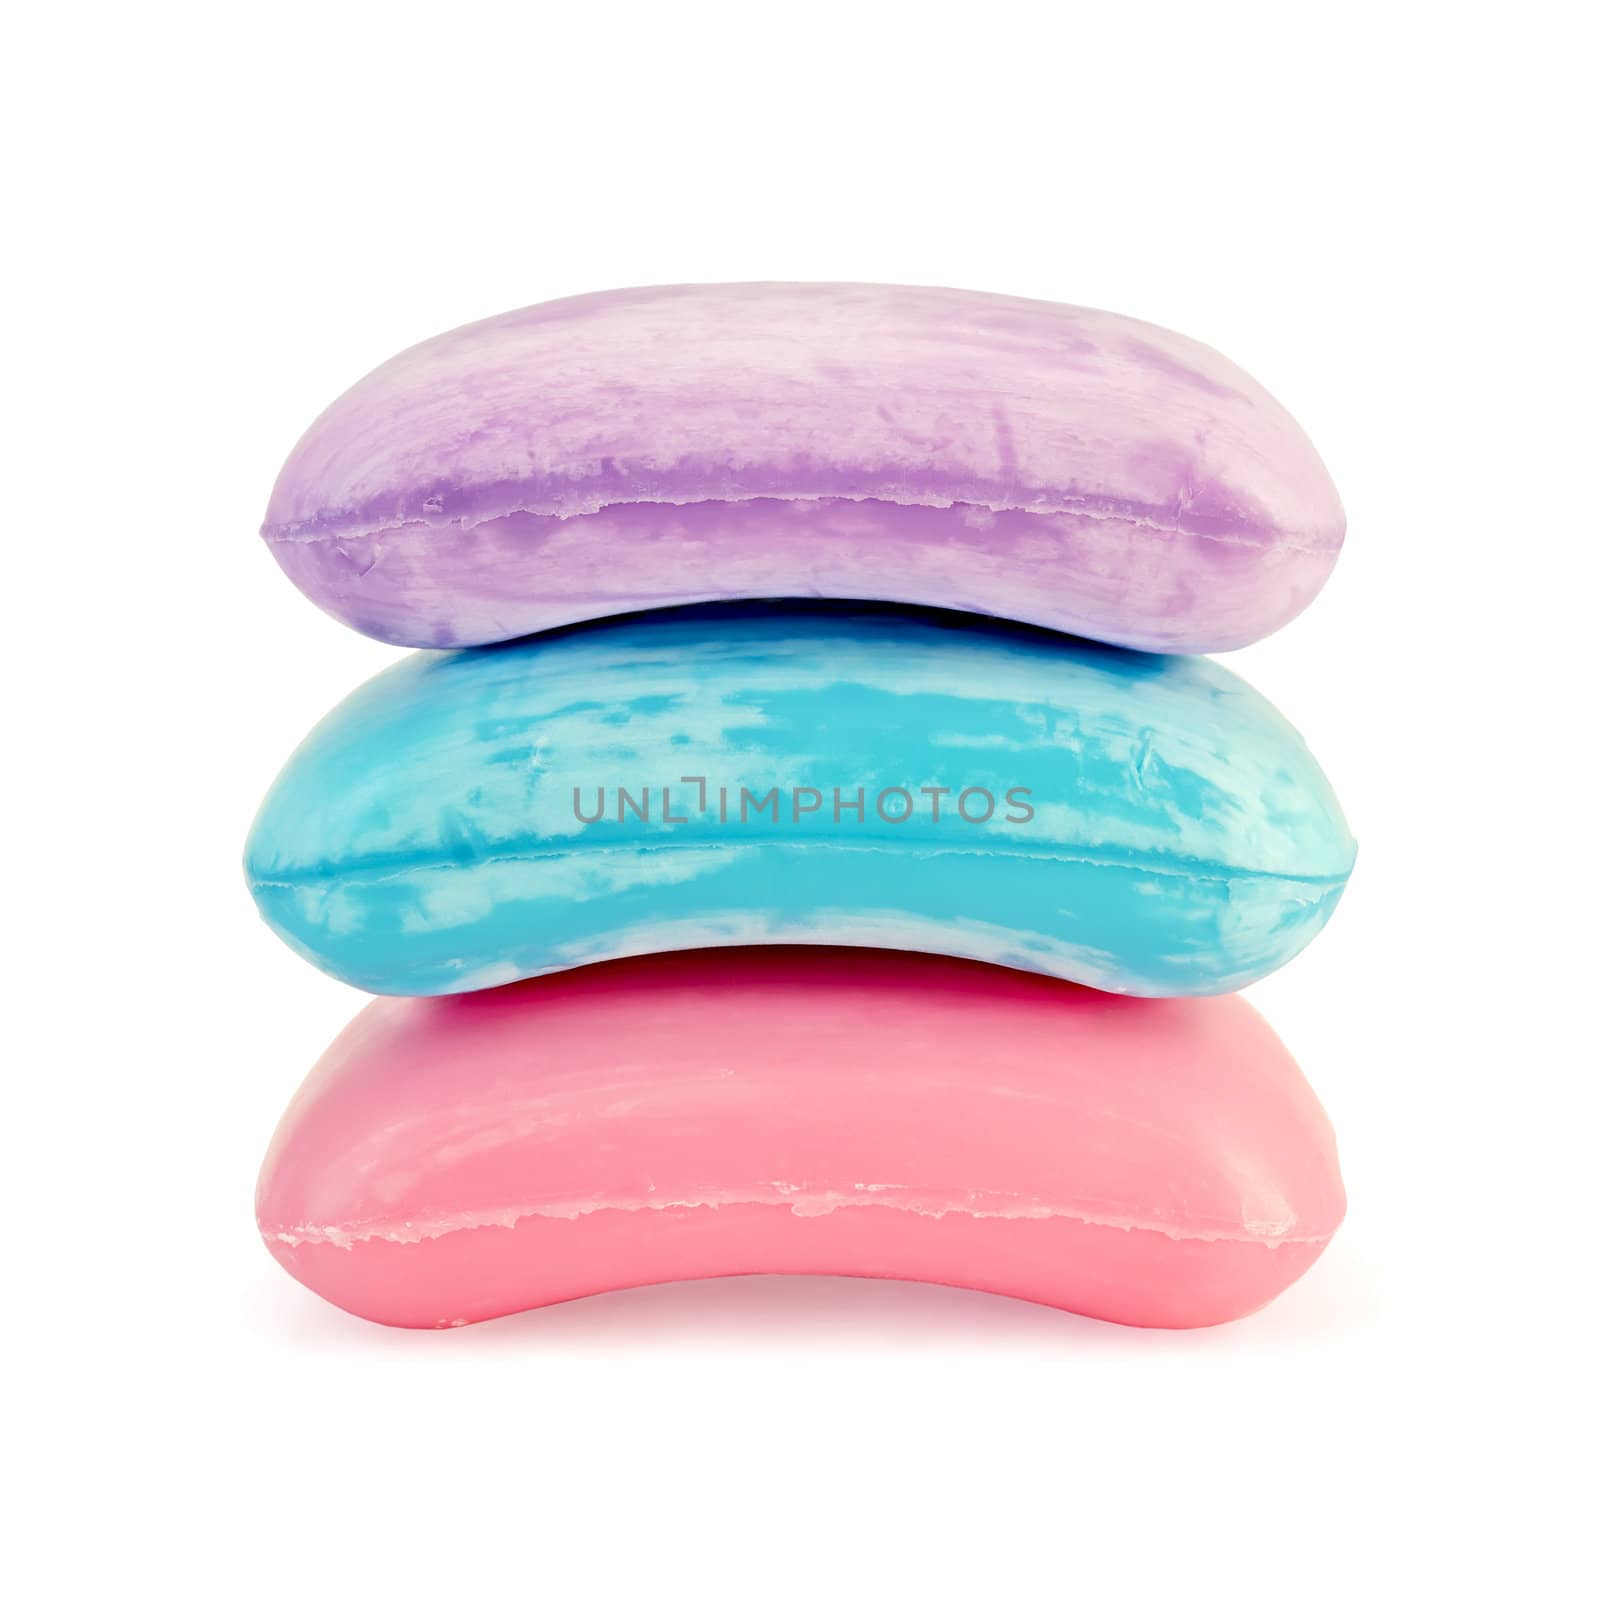 Three pieces of soap pink, blue and purple colors isolated on white background